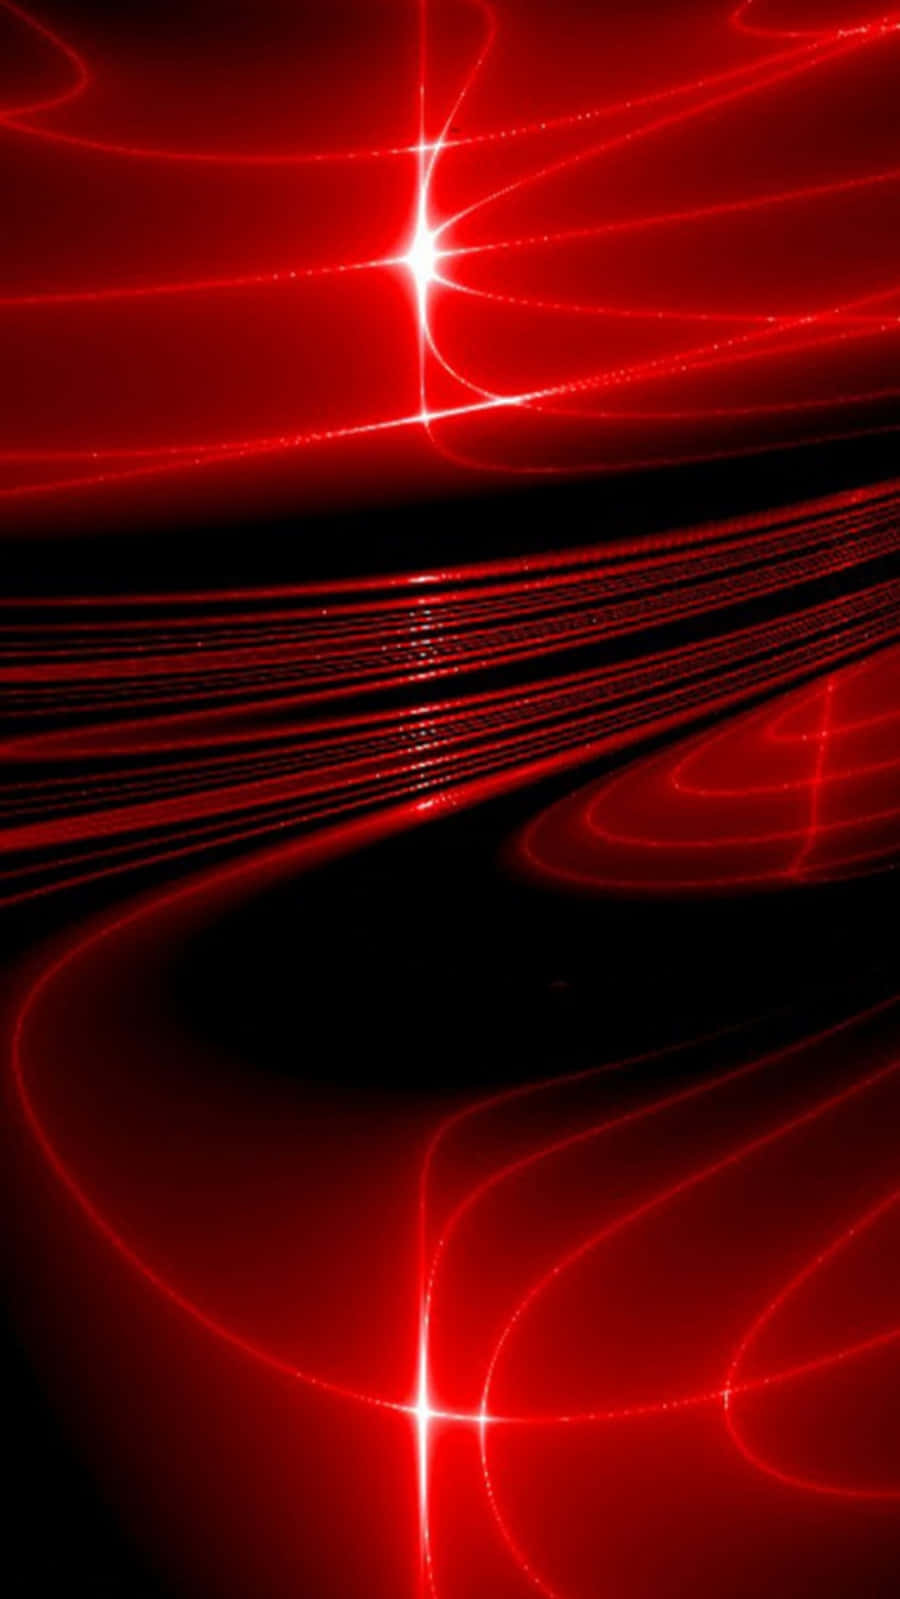 Get the latest Apple tech with the Red Iphone X Wallpaper